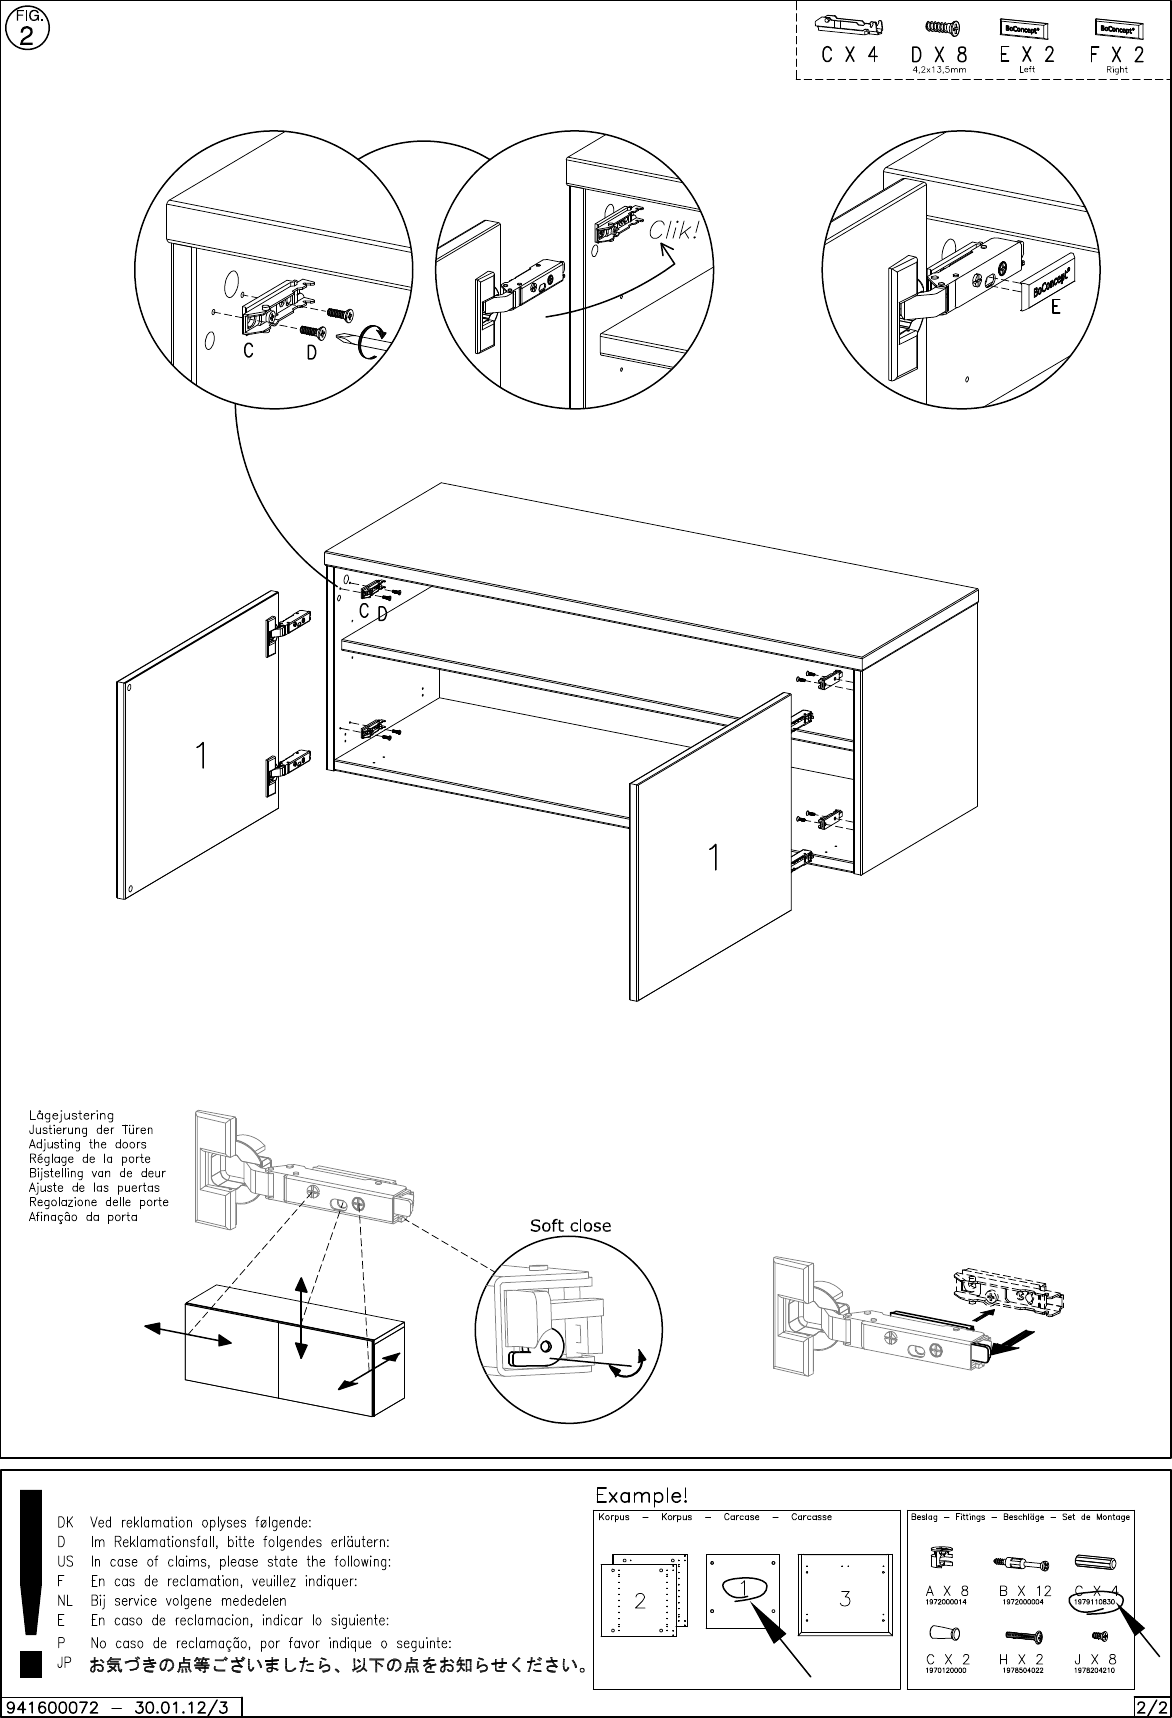 Page 2 of 2 - Boconcept Boconcept--72-Assembly-Instruction B:\DK_PTA_Share\Inventor Ation\360 Volani\Volani 0072\Assembly Instruction\941600072_v3_05